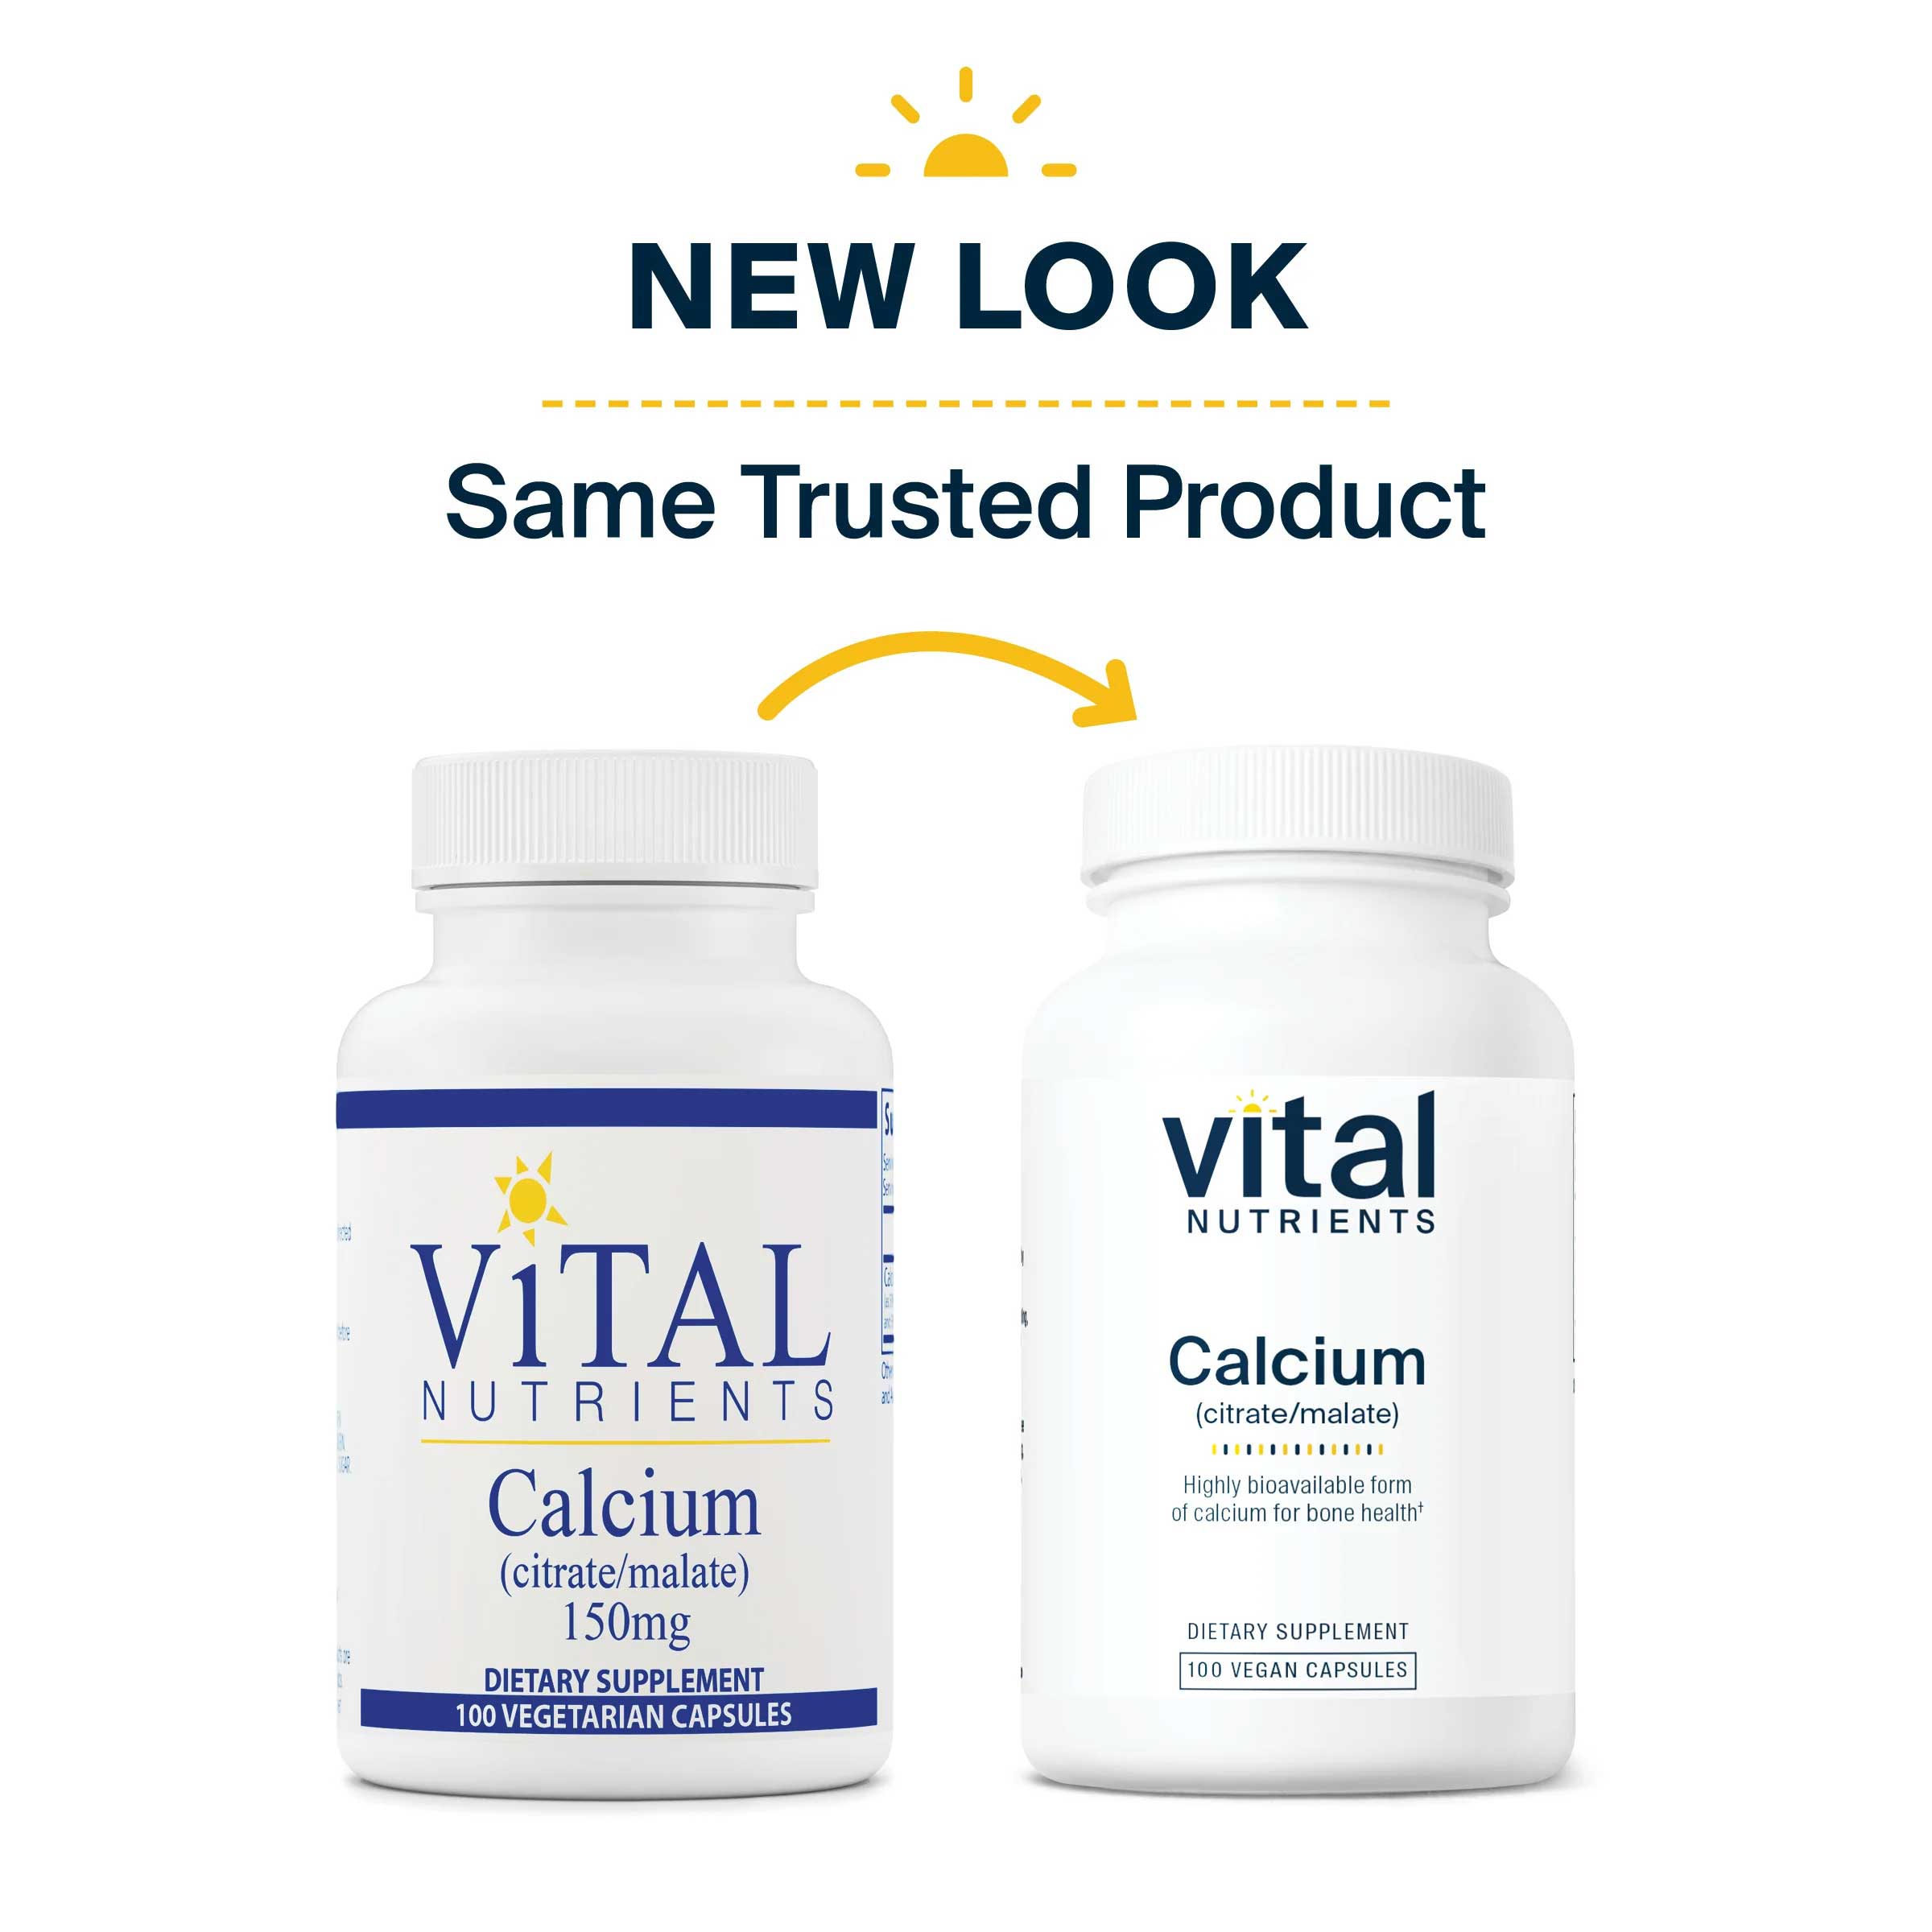 Vital Nutrients Calcium (citrate/malate) 150mg New Look